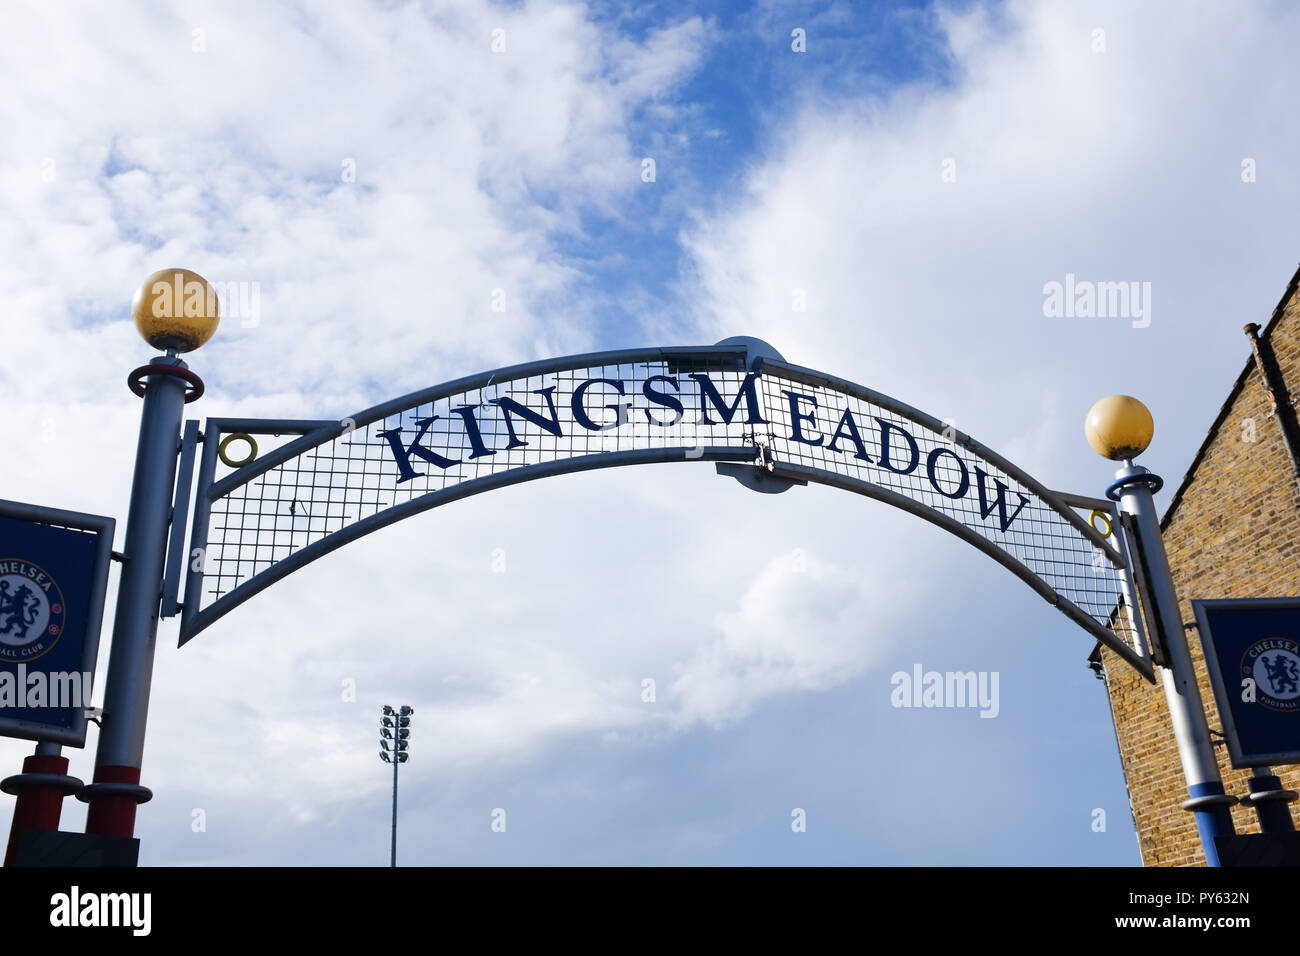 Kings Meadow in New Malden Kingston home of Kingstonian football club and Chelsea Women's team Photograph taken by Simon Dack Stock Photo